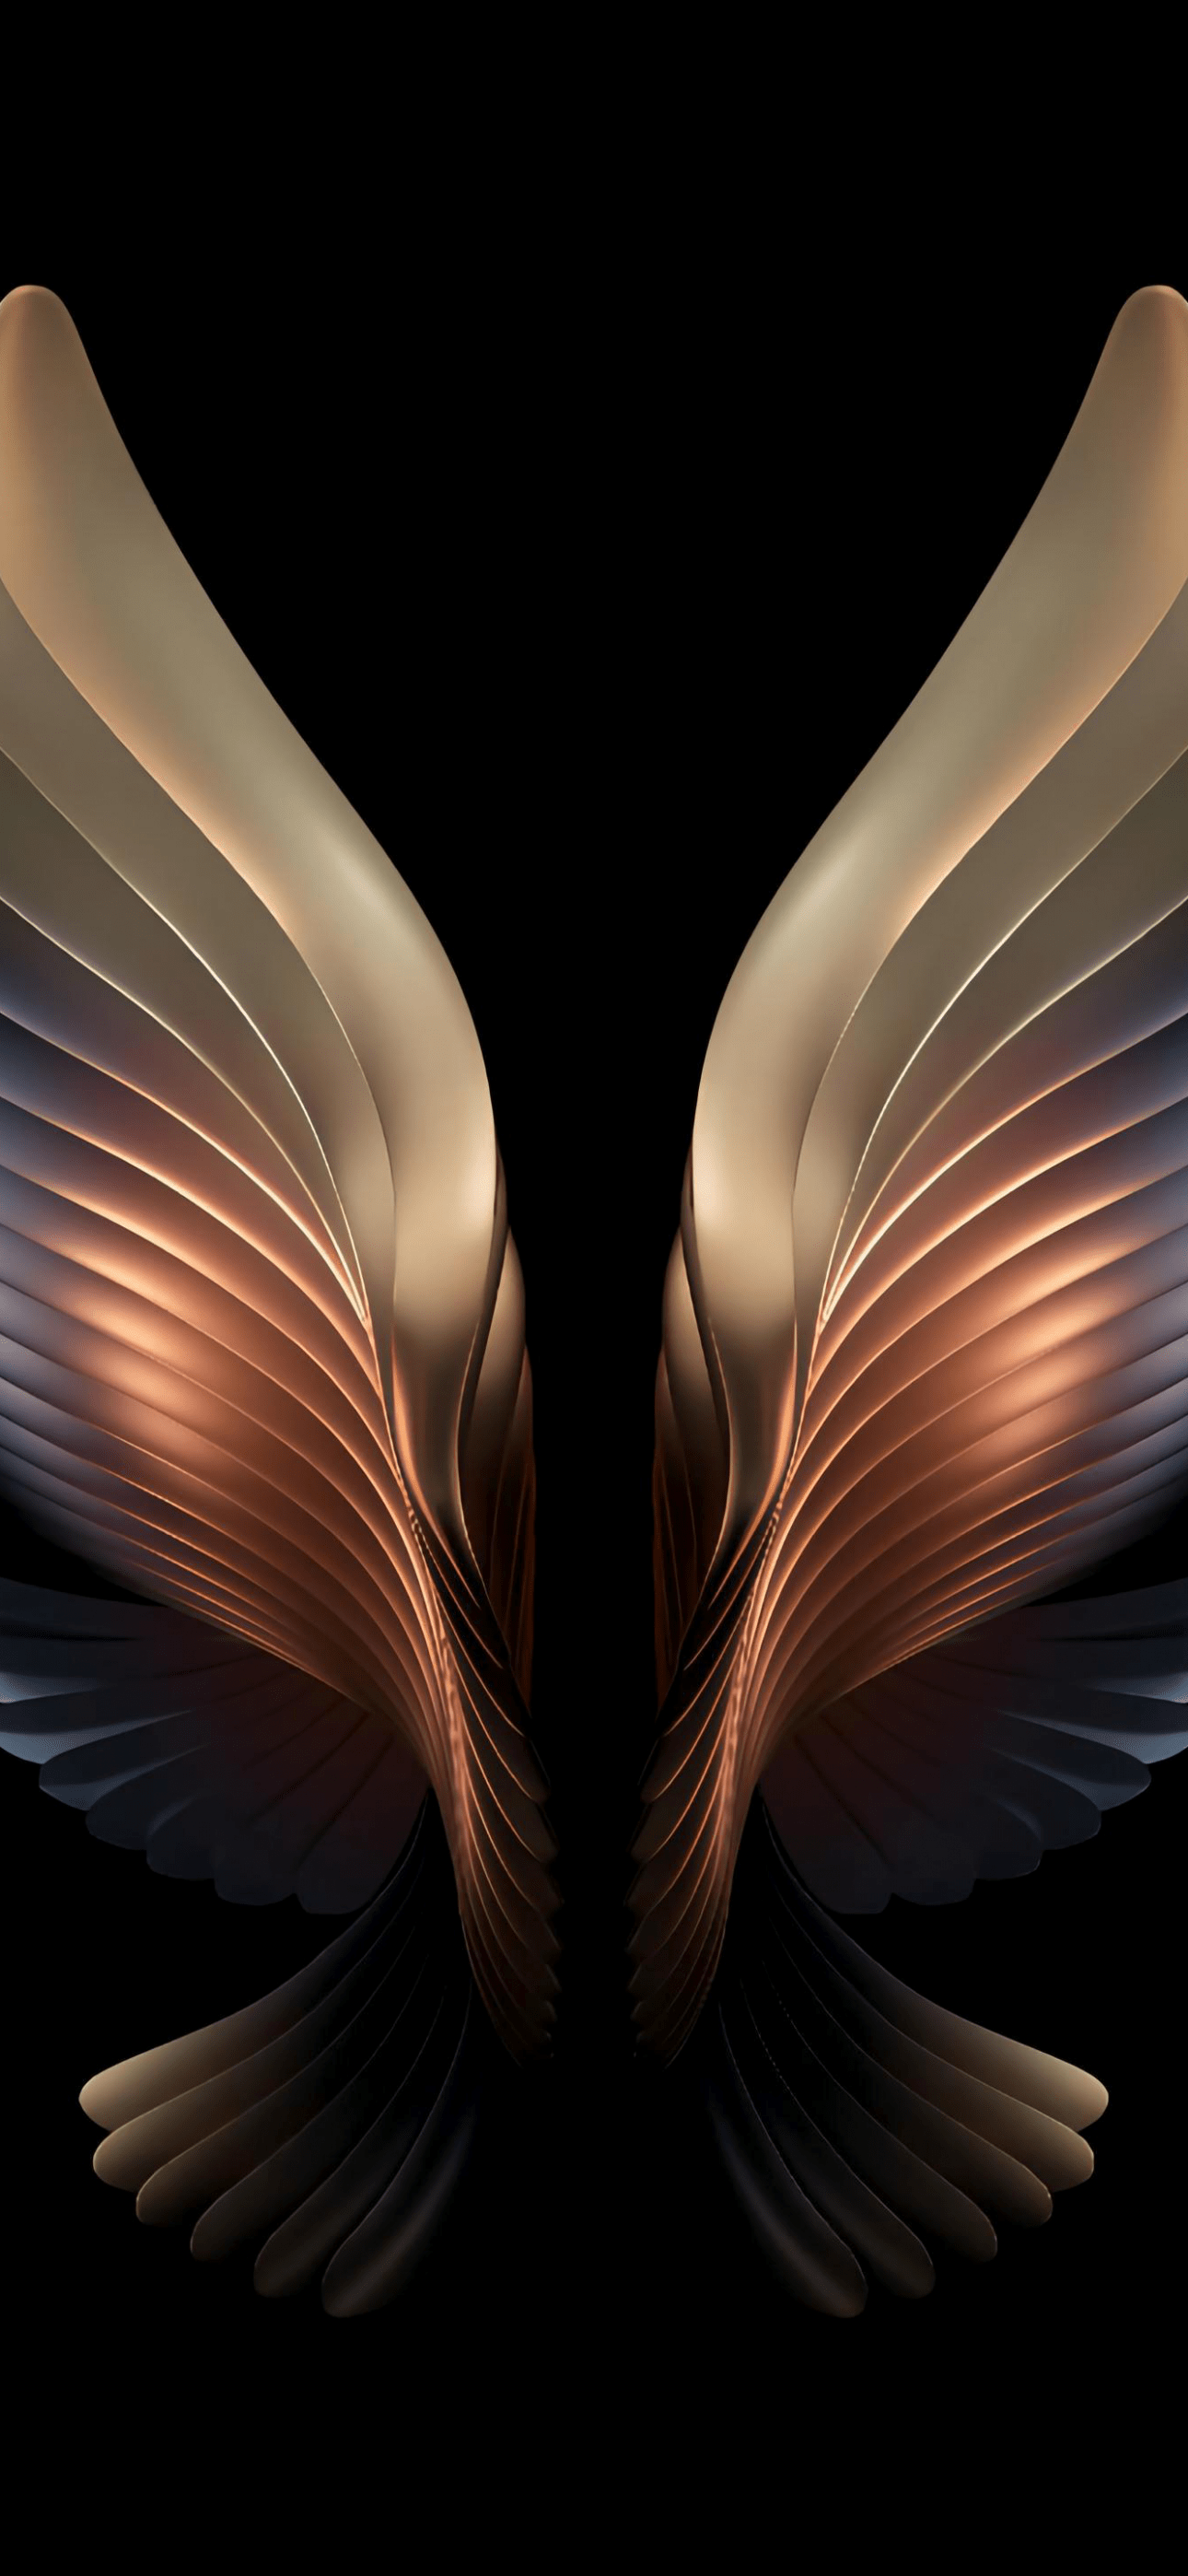 Download wallpapers 1242x2208 abstract, 3D, wings, black background for iPhone X from the biggest community of… - Wings